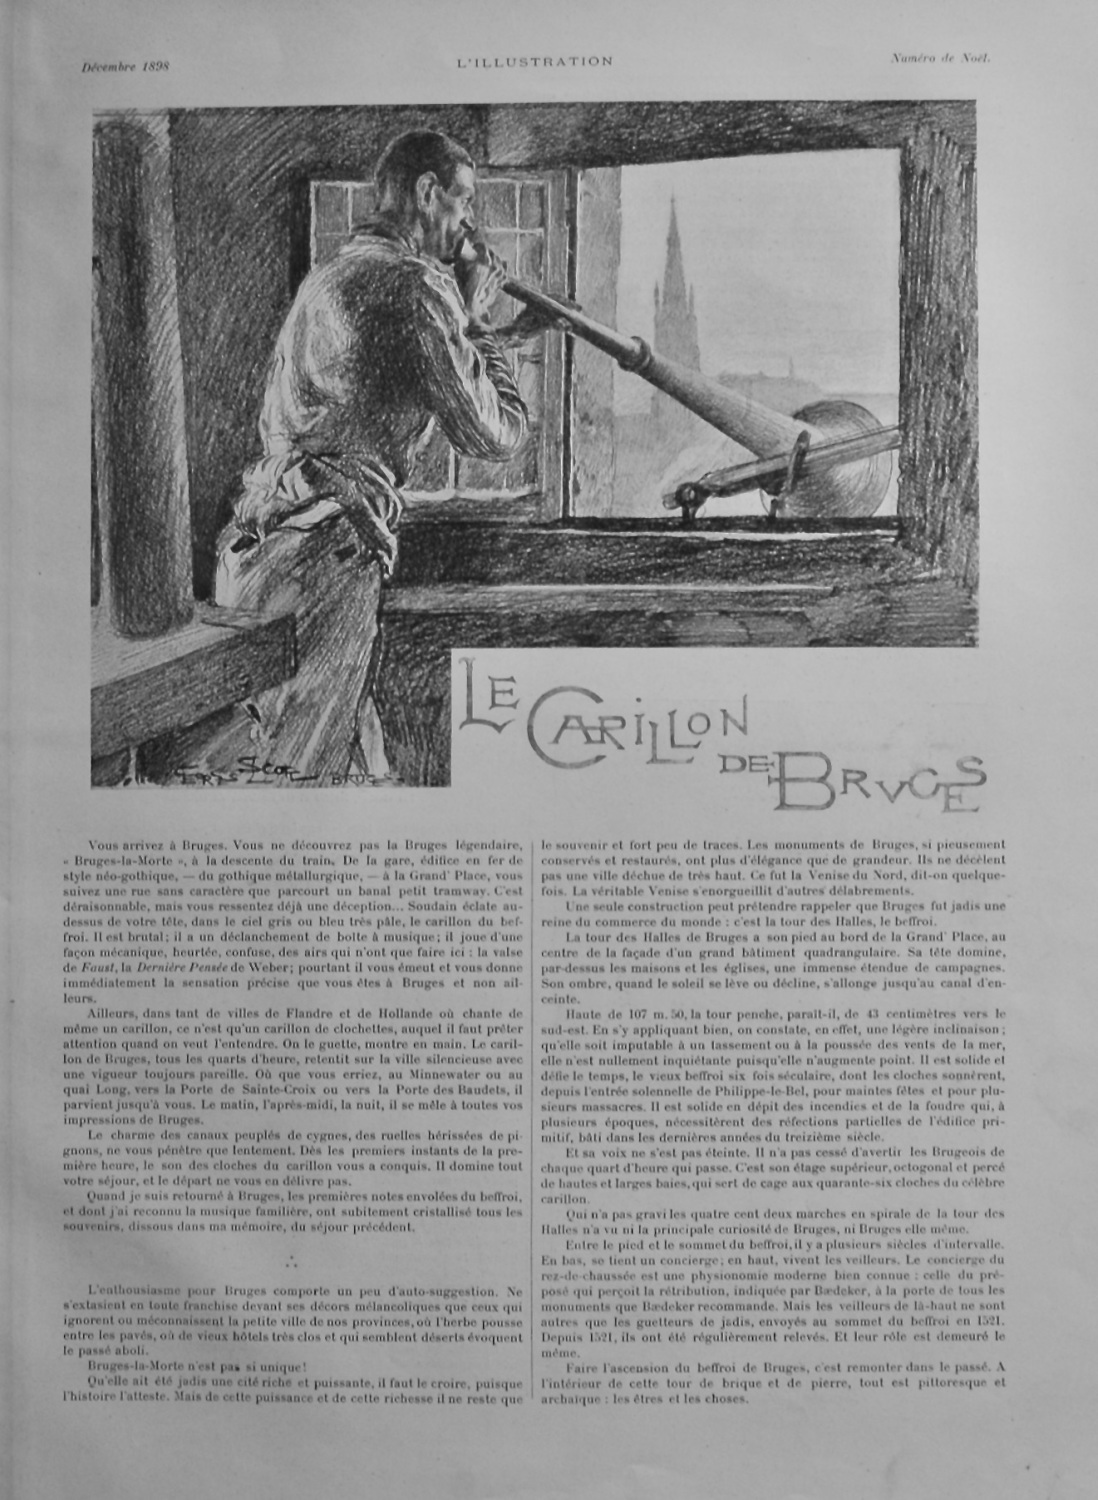 Le Carillon de Bruges. (Written by Maurice Normand.)   1898.